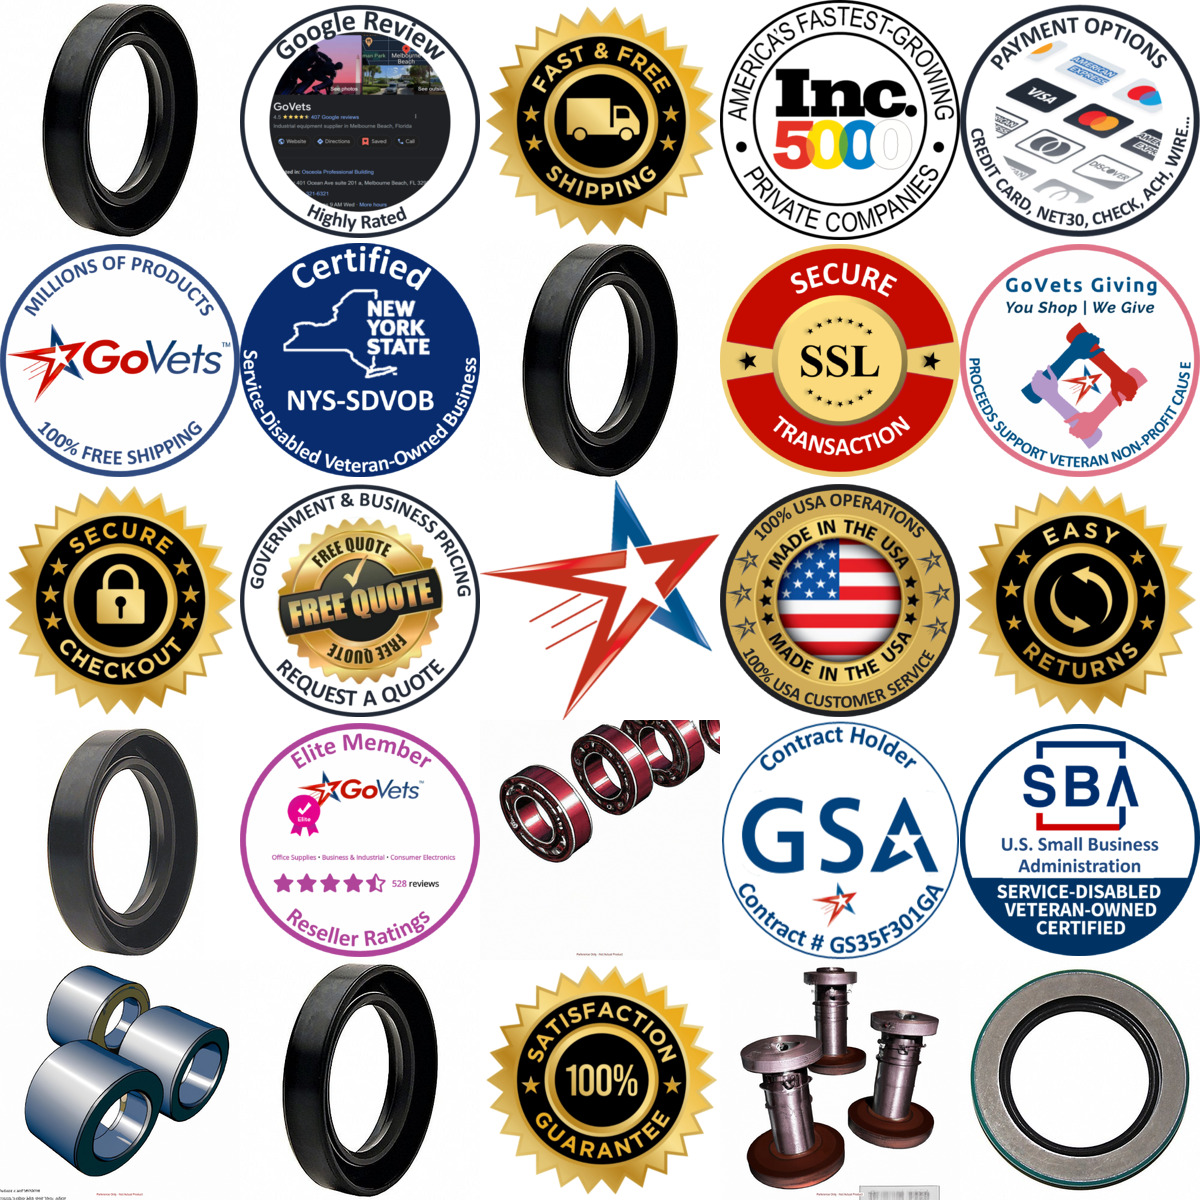 A selection of Rotary Shaft Seals products on GoVets